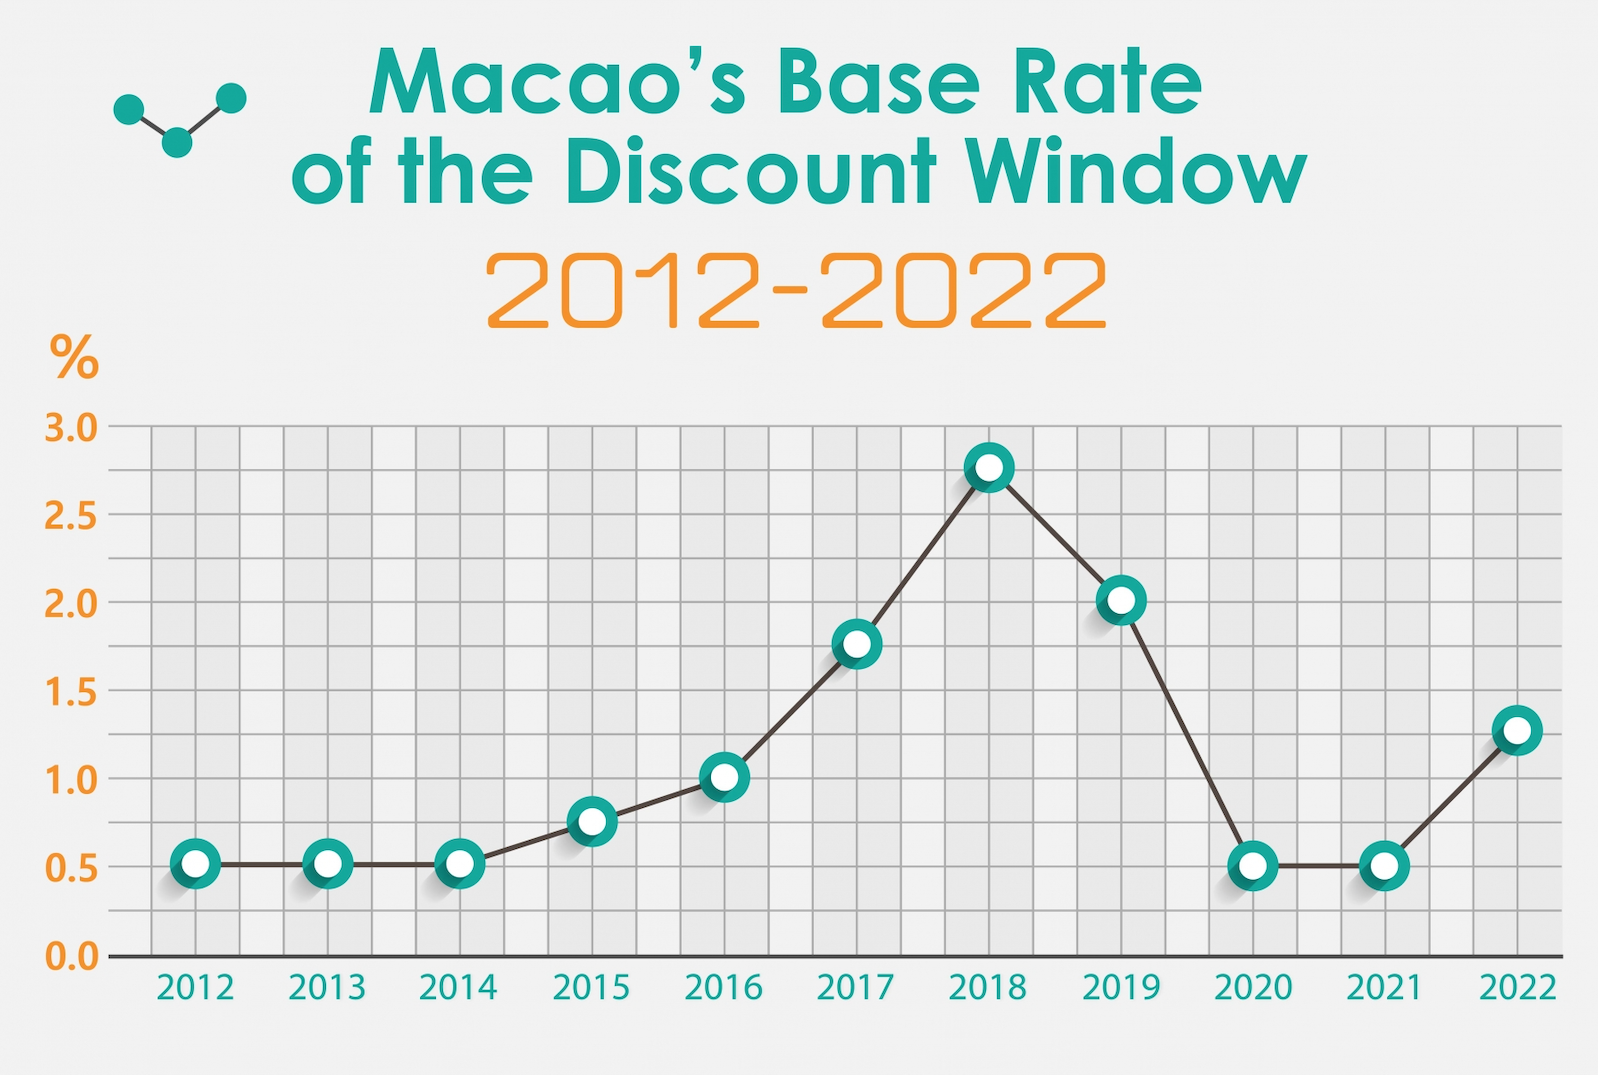 Macao’s discount window base rate raised to 1.25%